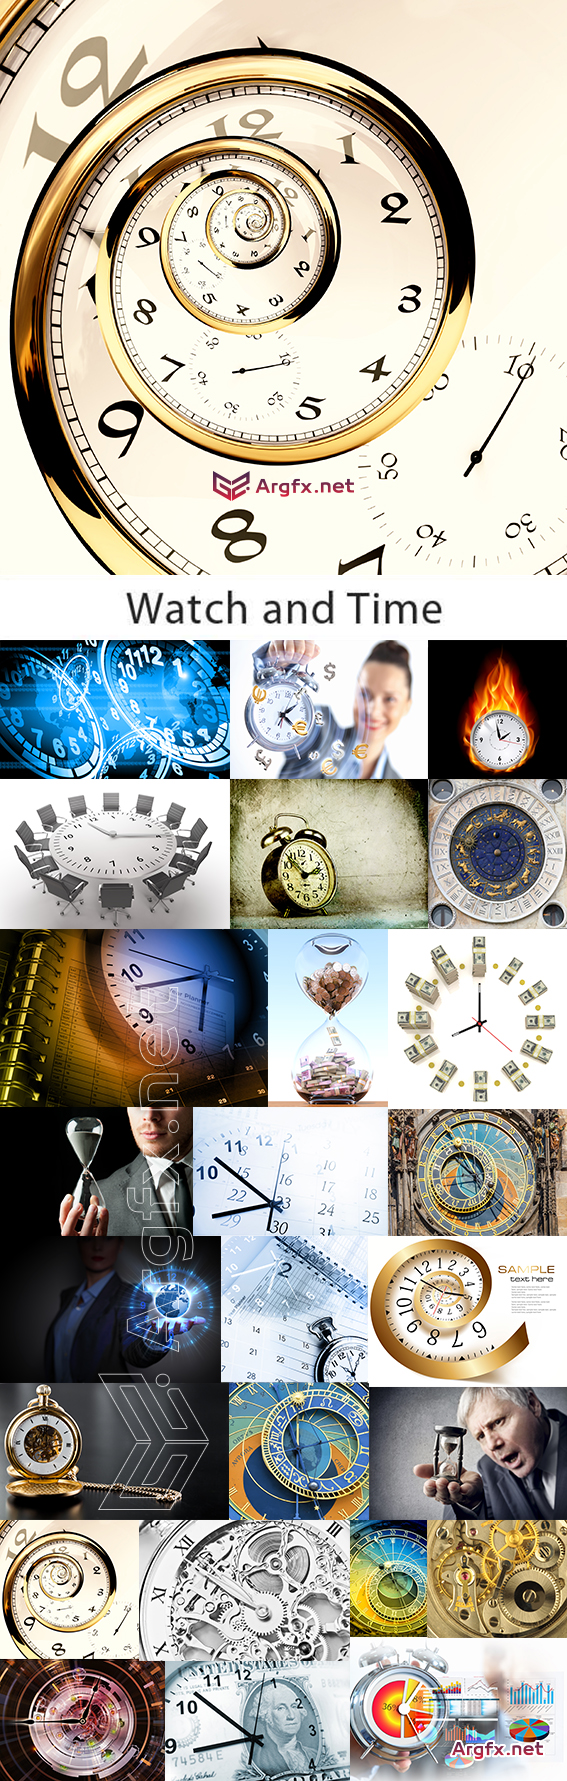 Watch & Time Collection 25xJPG